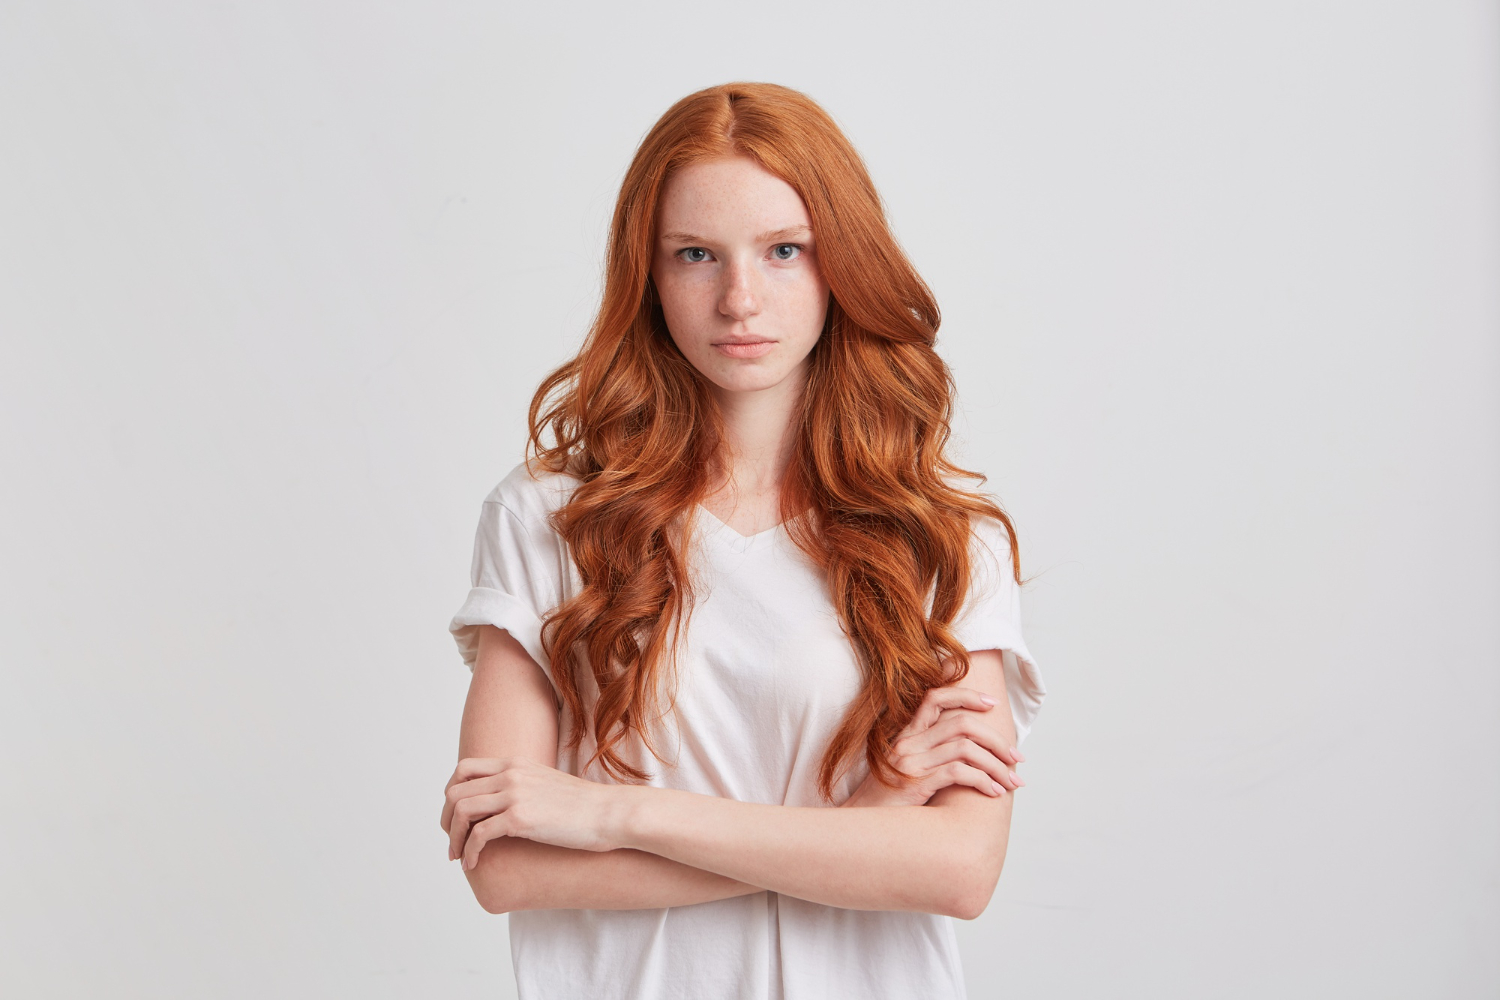 portrait cheerful pretty redhead young woman with long wavy hair